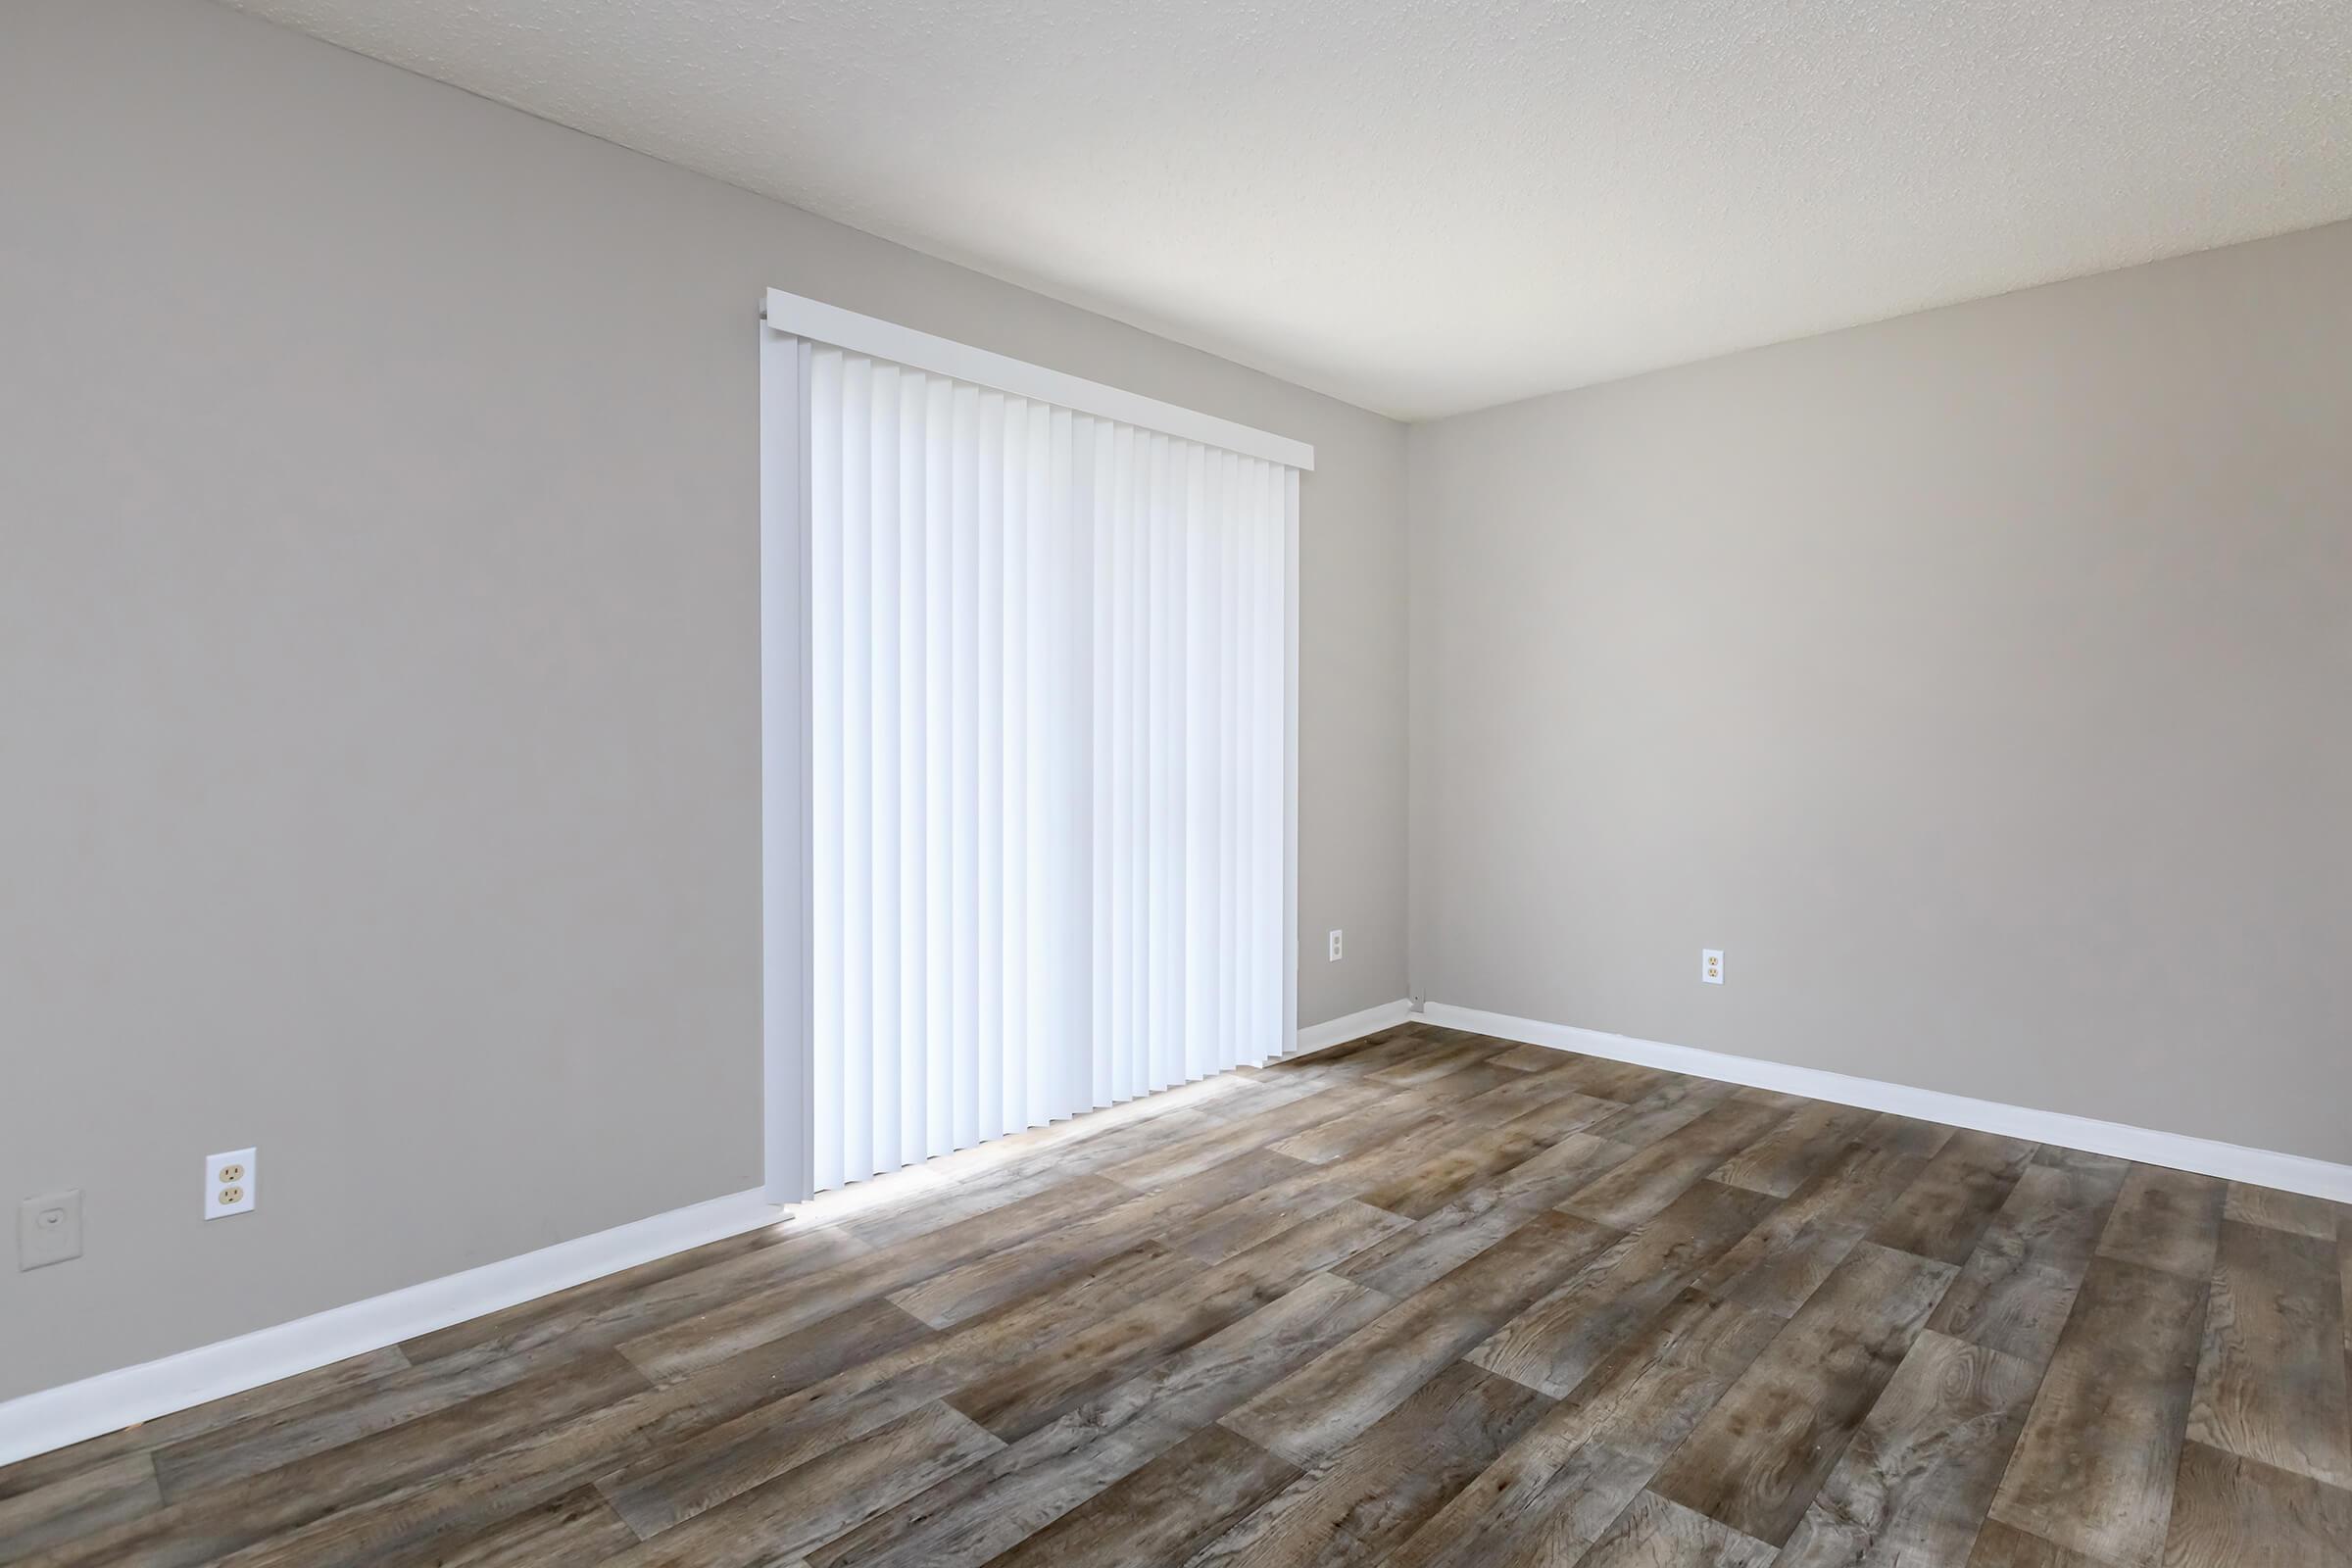 Splendid floors in Hickory View Apartments living rooms